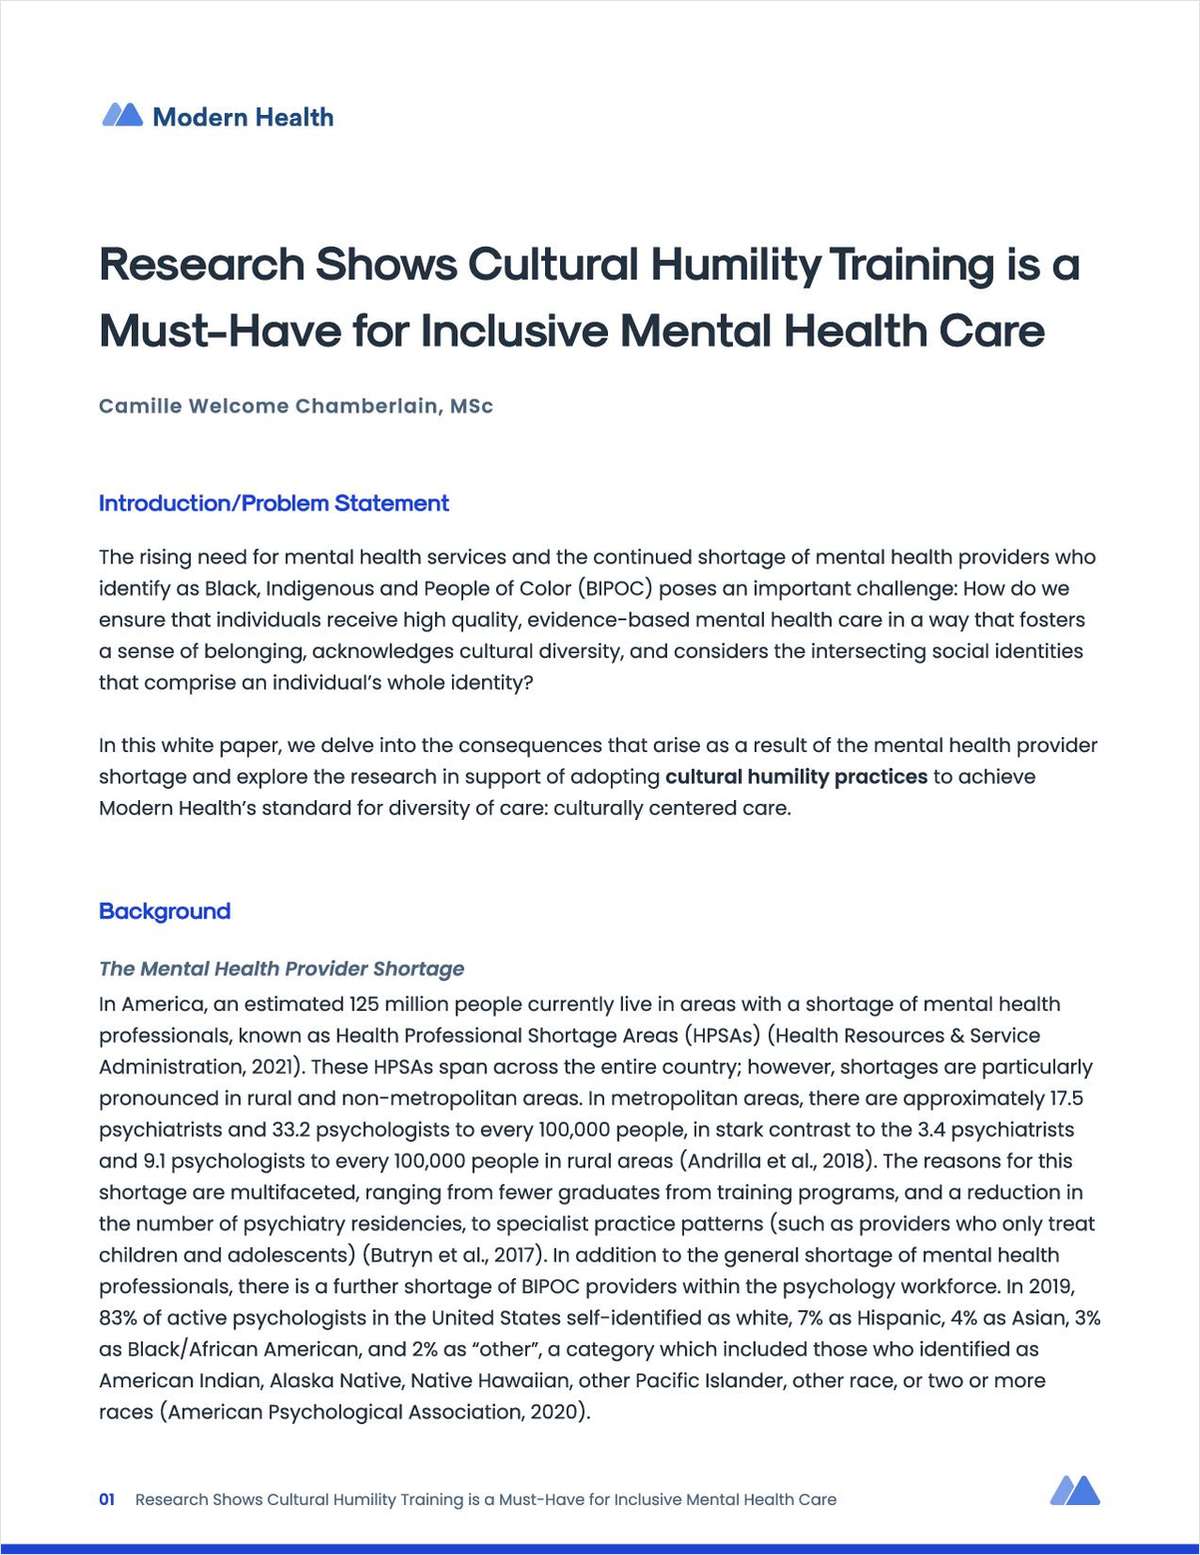 Cultural Humility Training Bolsters Quality Mental Health Care